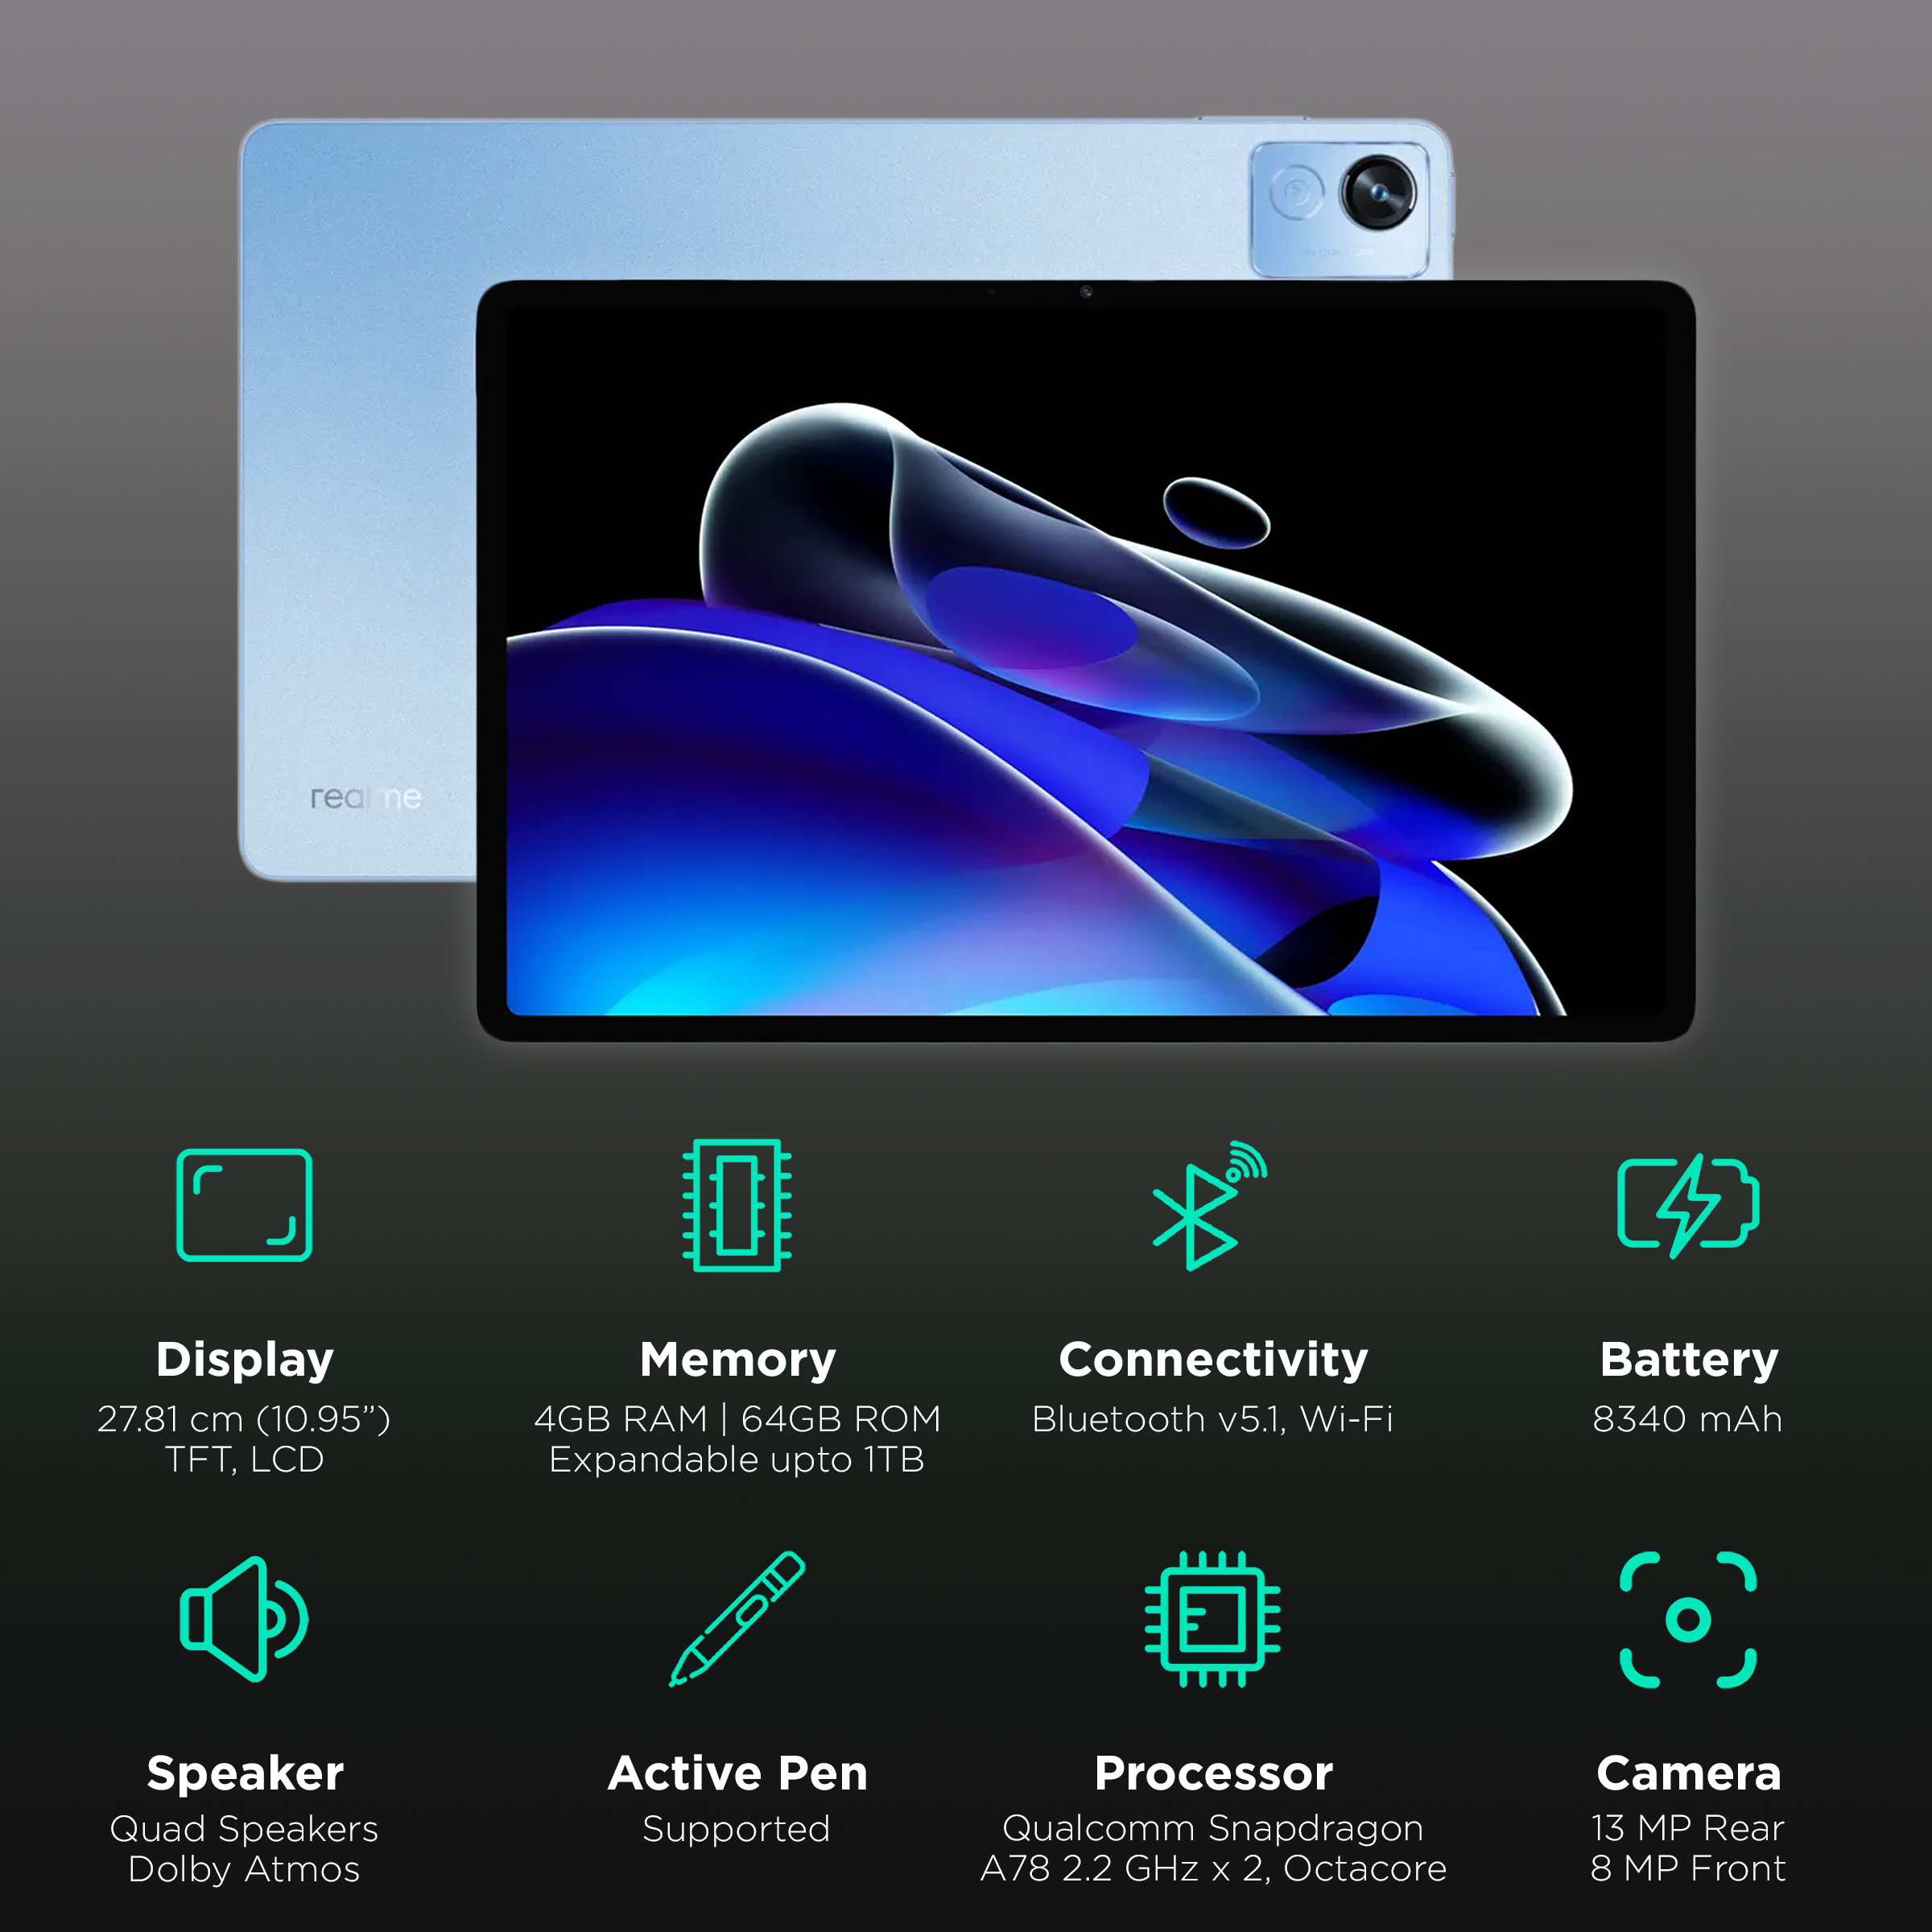 Honor Pad 5 4 GB RAM 64 GB ROM 8 inch with Wi-Fi+4G Tablet (Glacial Blue)  Price in India - Buy Honor Pad 5 4 GB RAM 64 GB ROM 8 inch